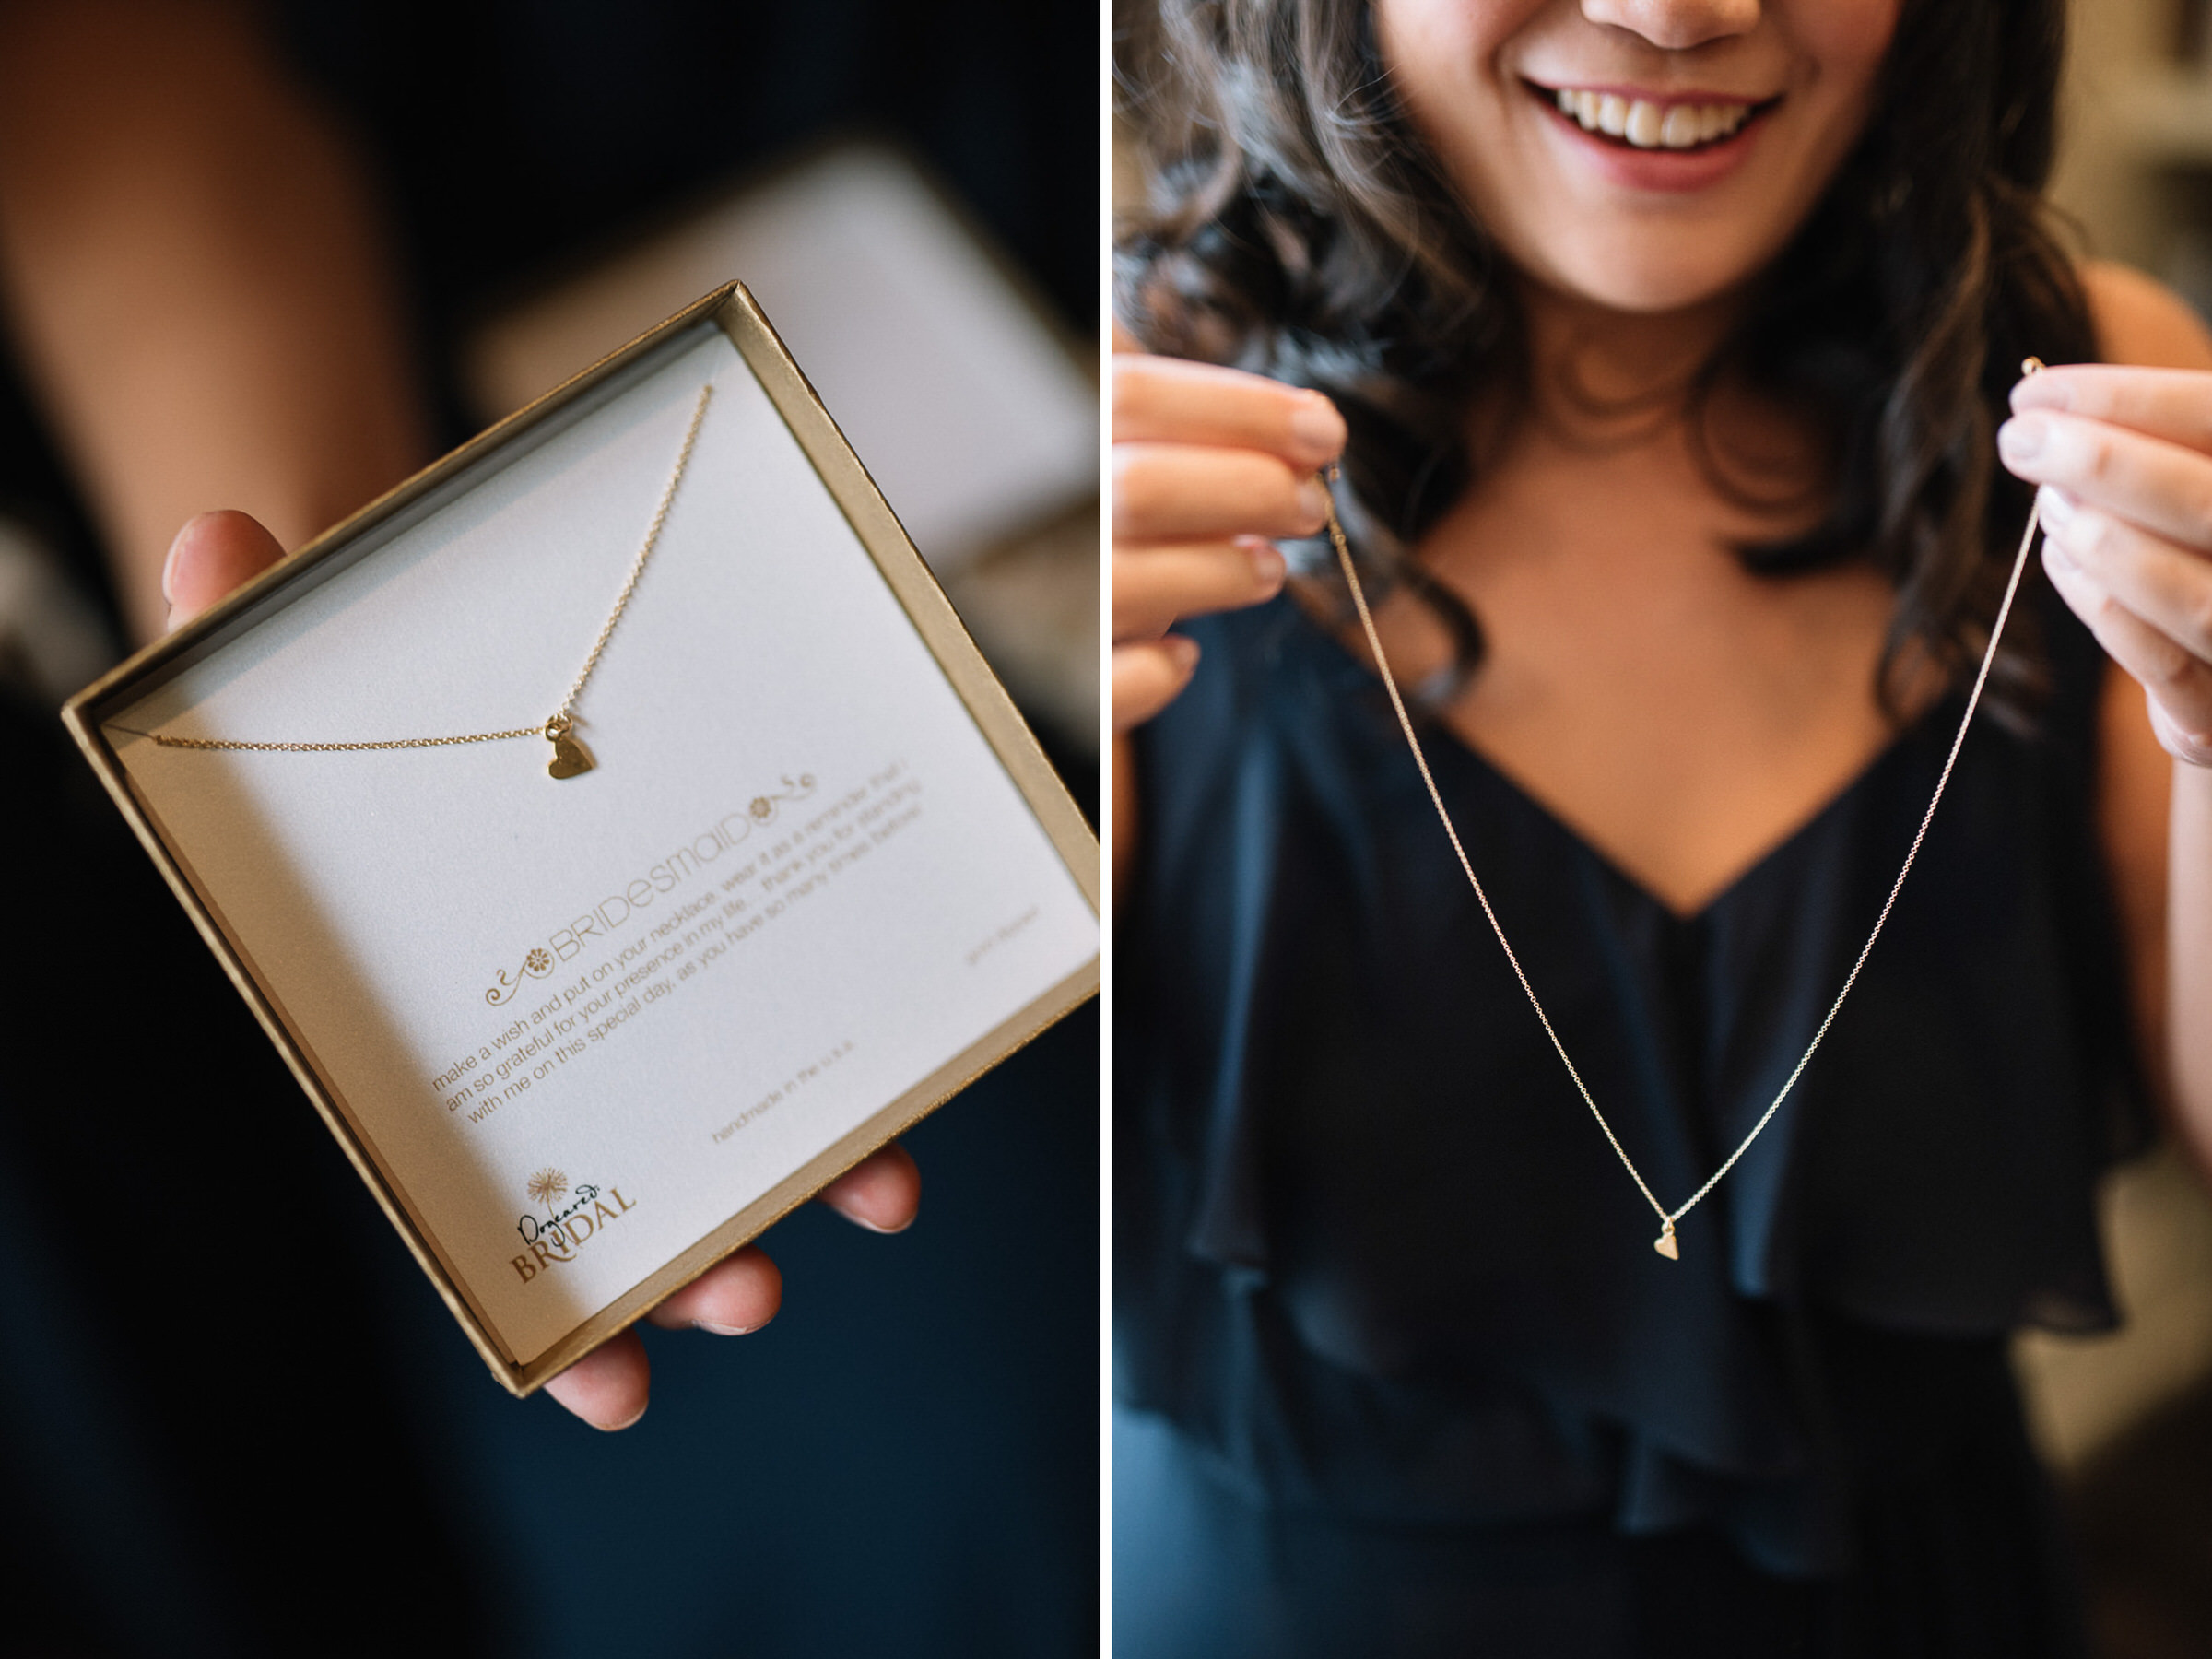 Amy gifts her bridesmaids lovely heart necklaces as thank-yous.